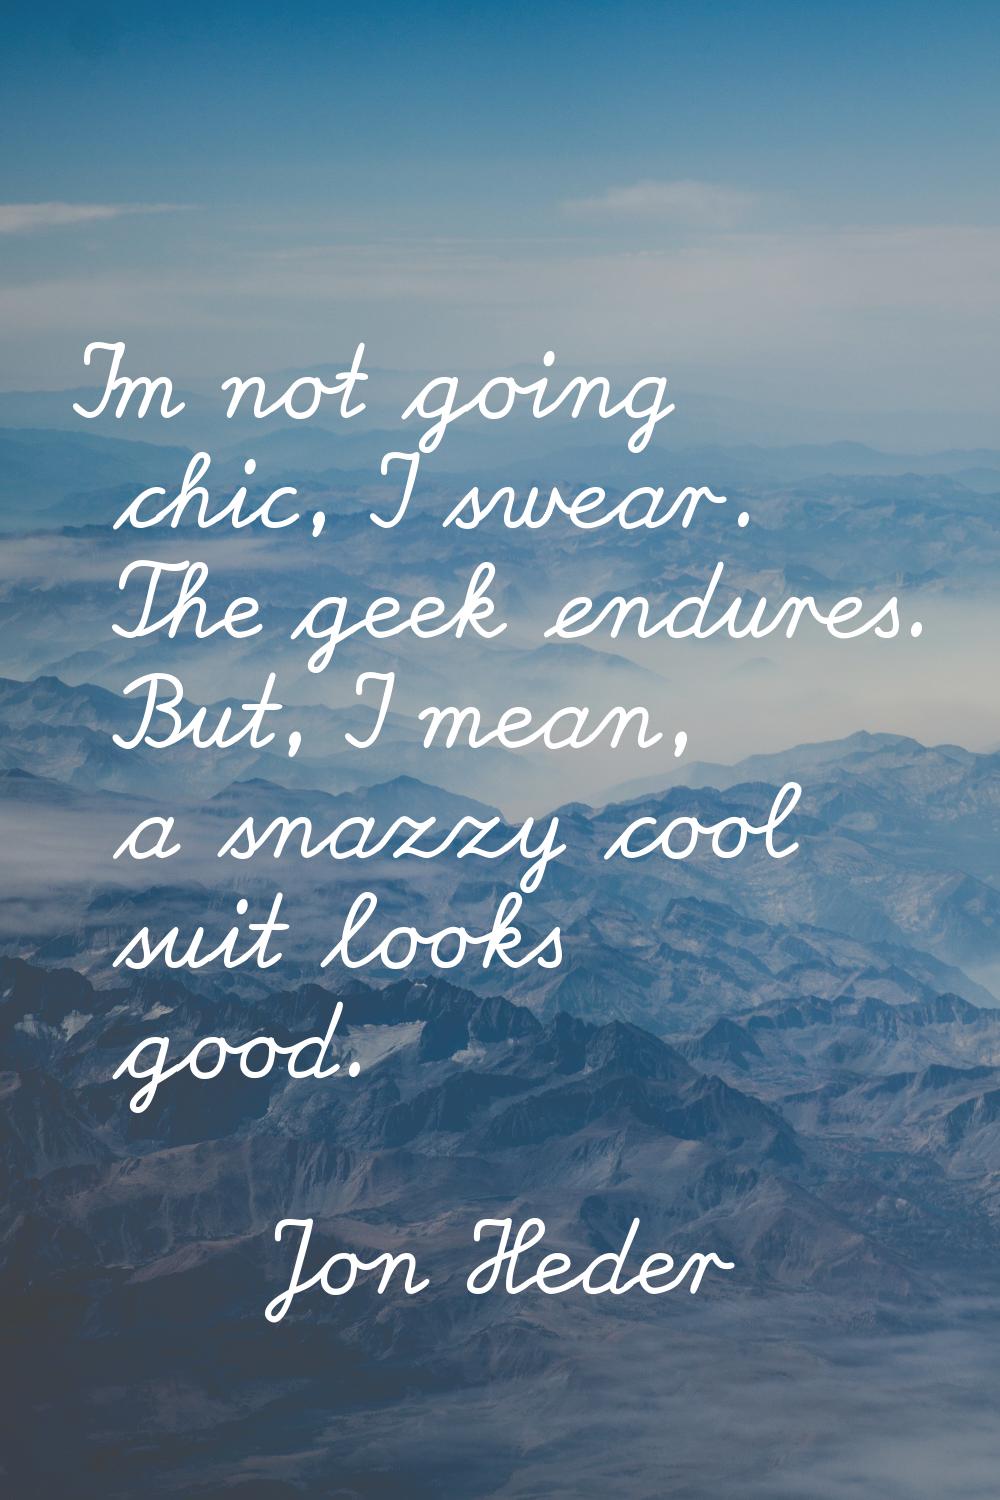 I'm not going chic, I swear. The geek endures. But, I mean, a snazzy cool suit looks good.